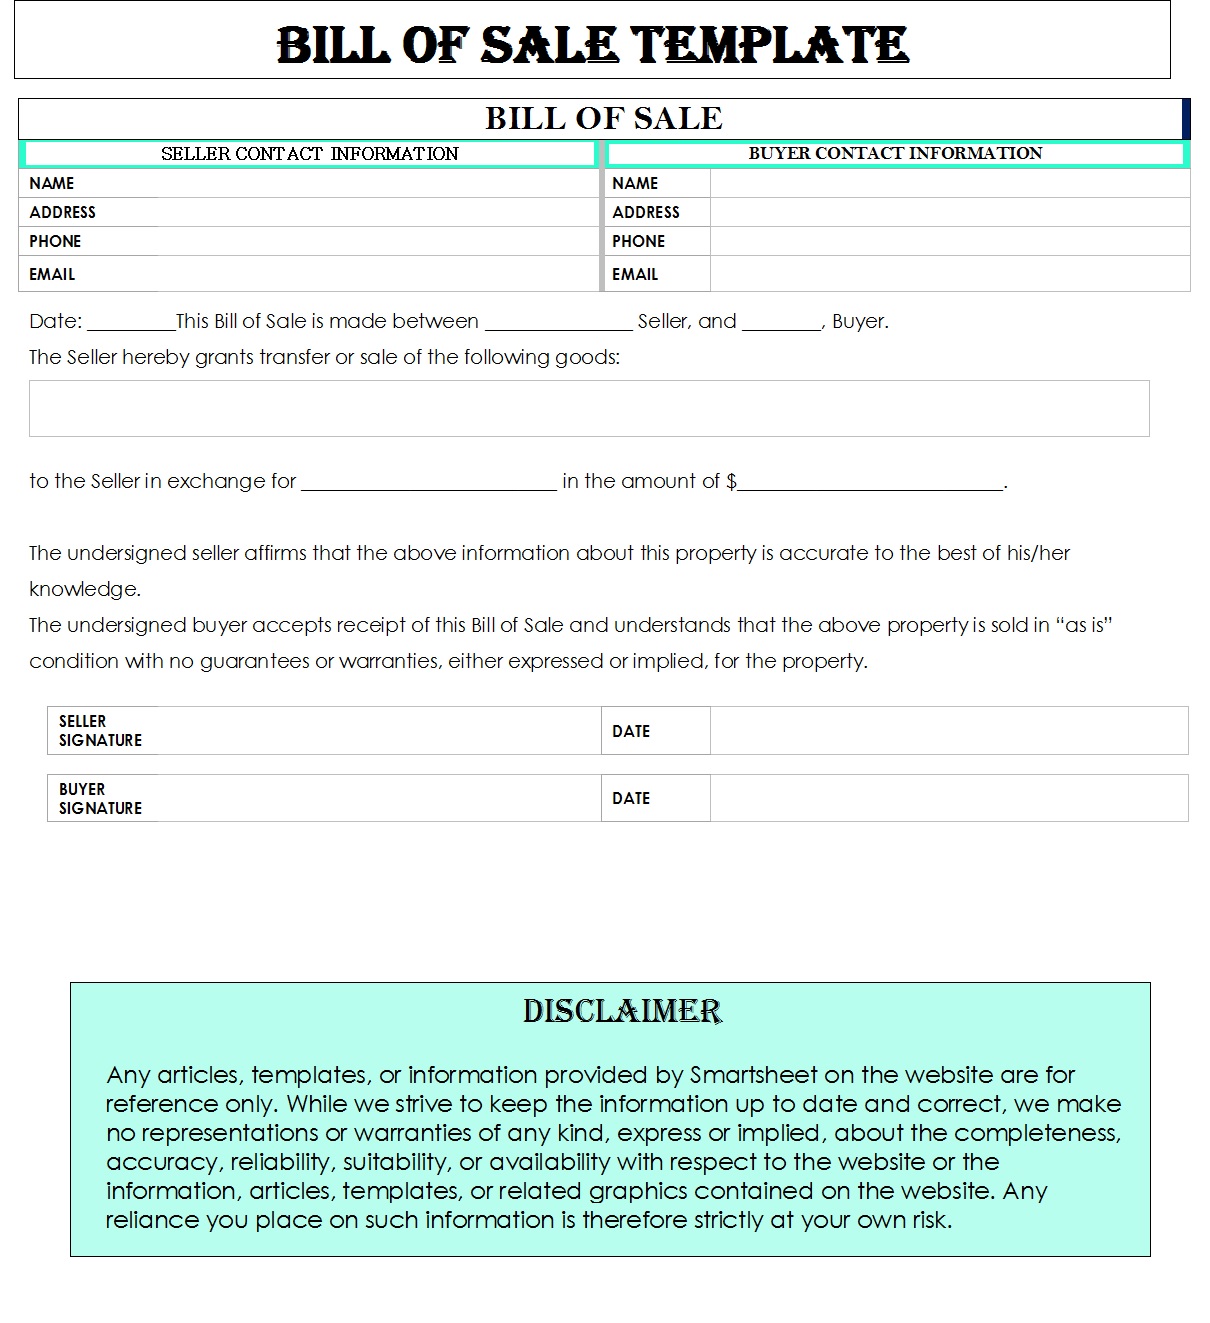 free-bill-of-sale-forms-24-word-pdf-eforms-basic-bill-of-sale-template-printable-blank-form